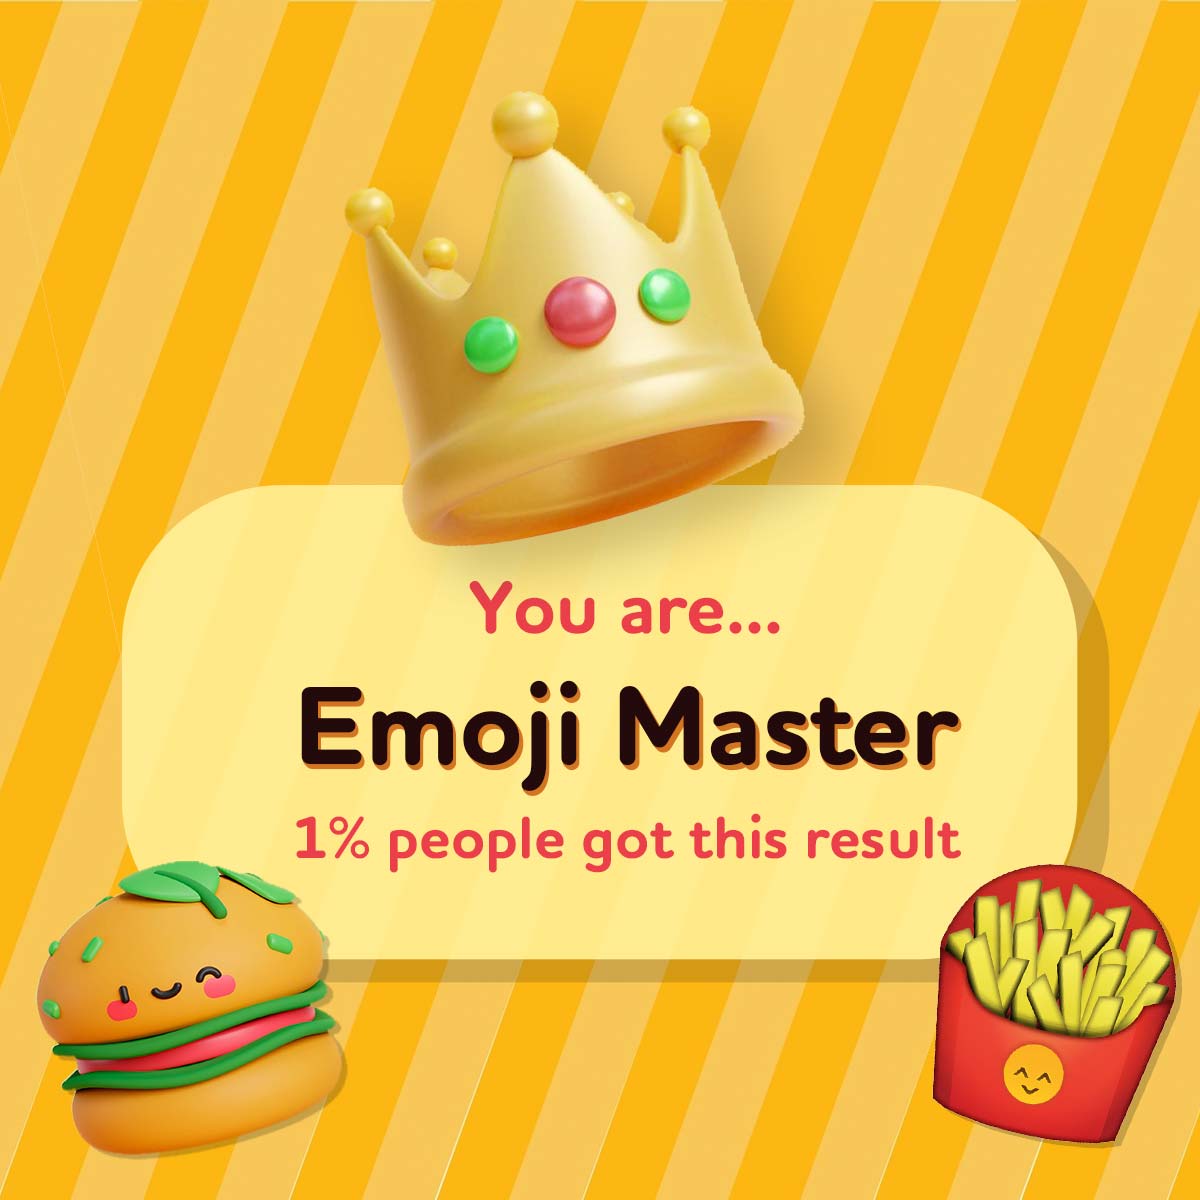 You got 23 out of 24! Only 1% Can Guess All the Fast Food Chains from Emojis Alone 🍔 🍟 🍕